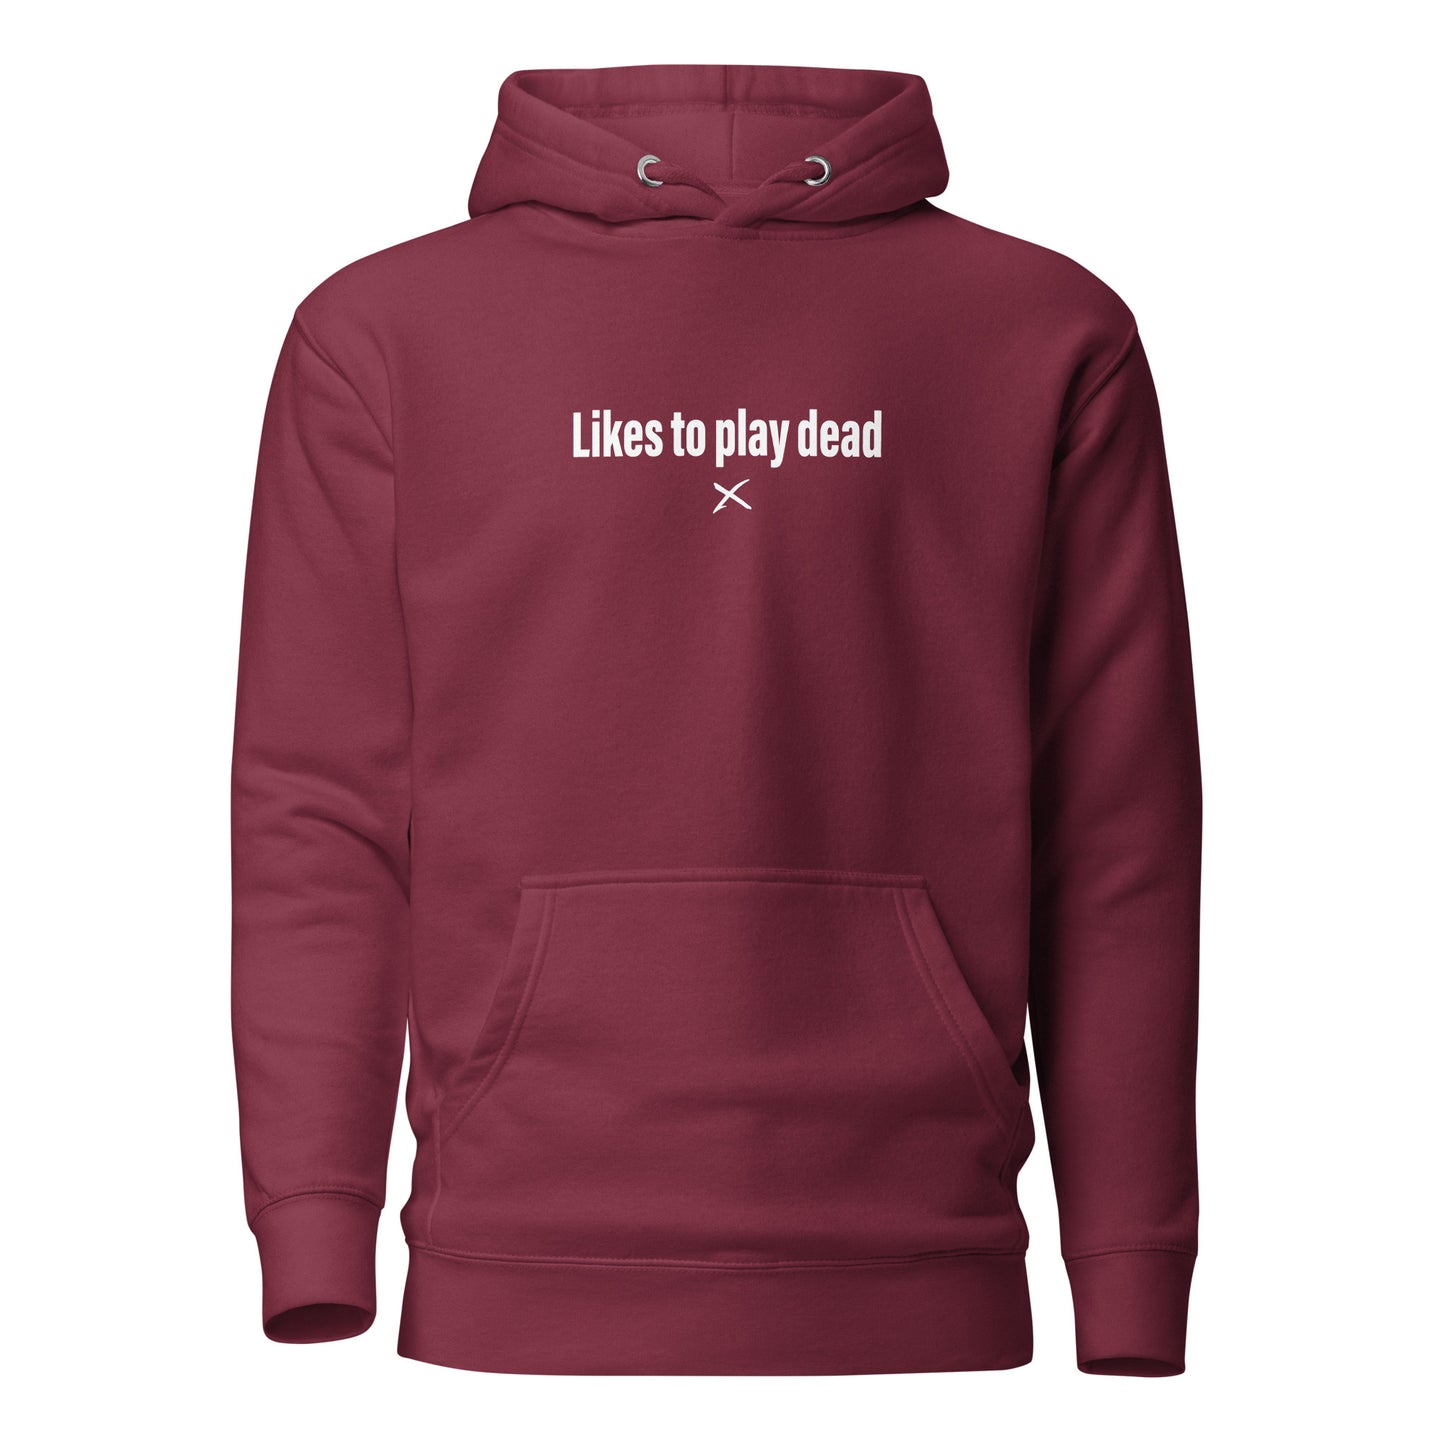 Likes to play dead - Hoodie